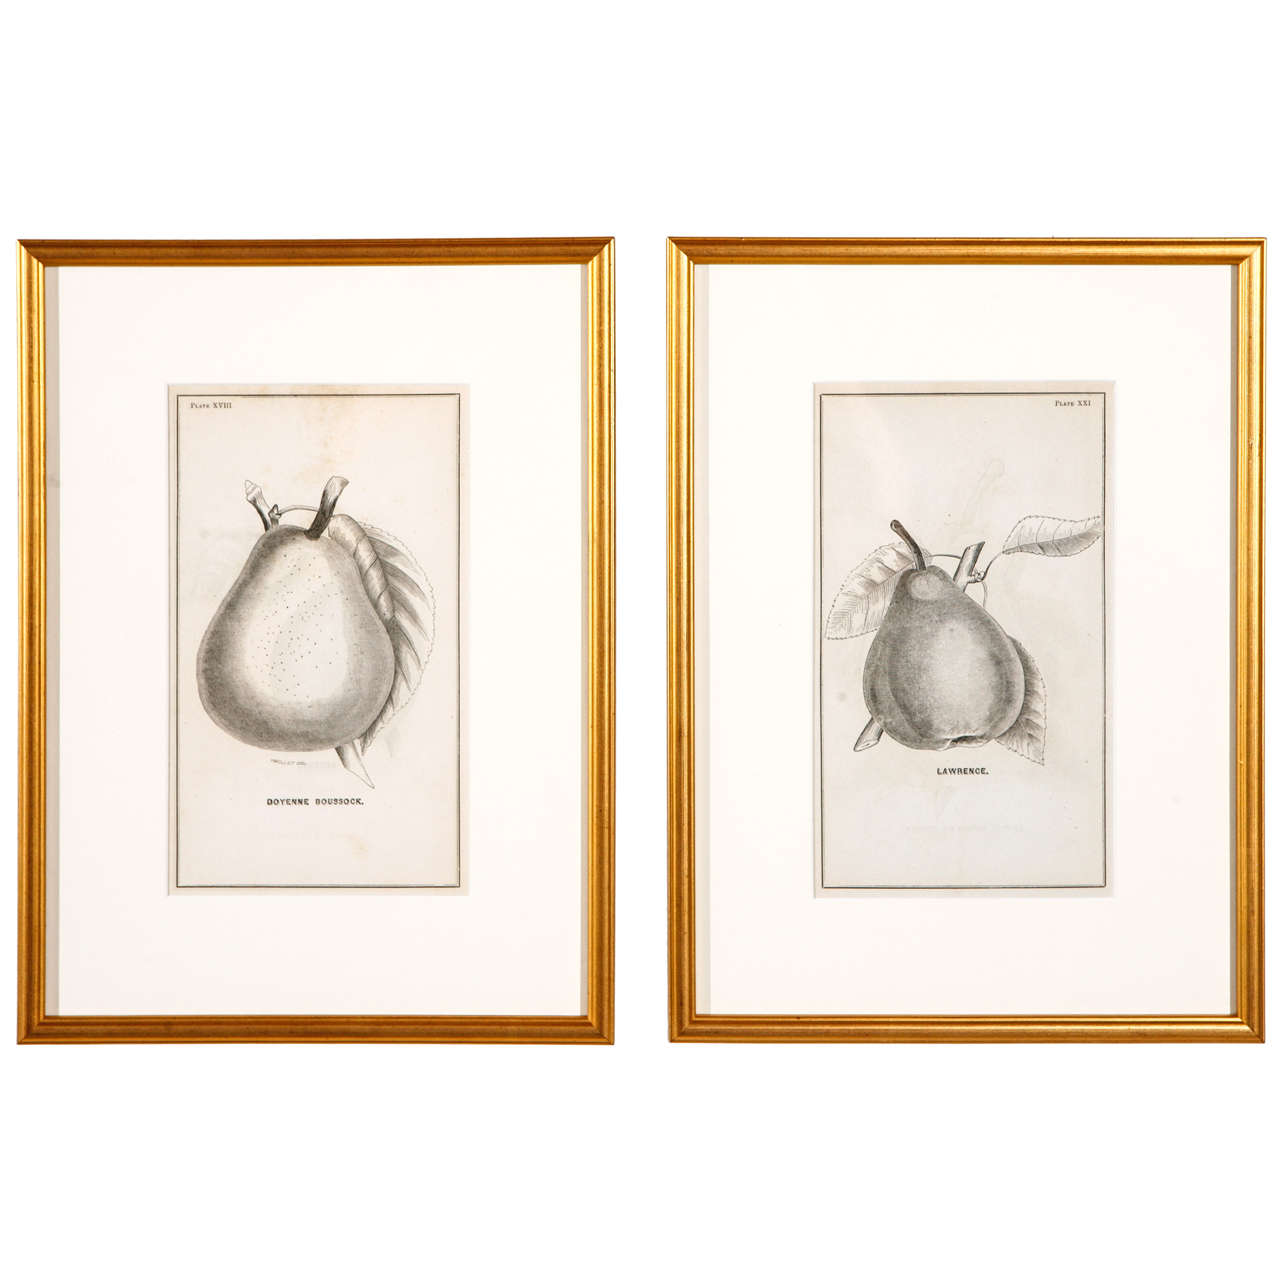 Gold Framed Pear Botanicals from 19th Century Catalogue